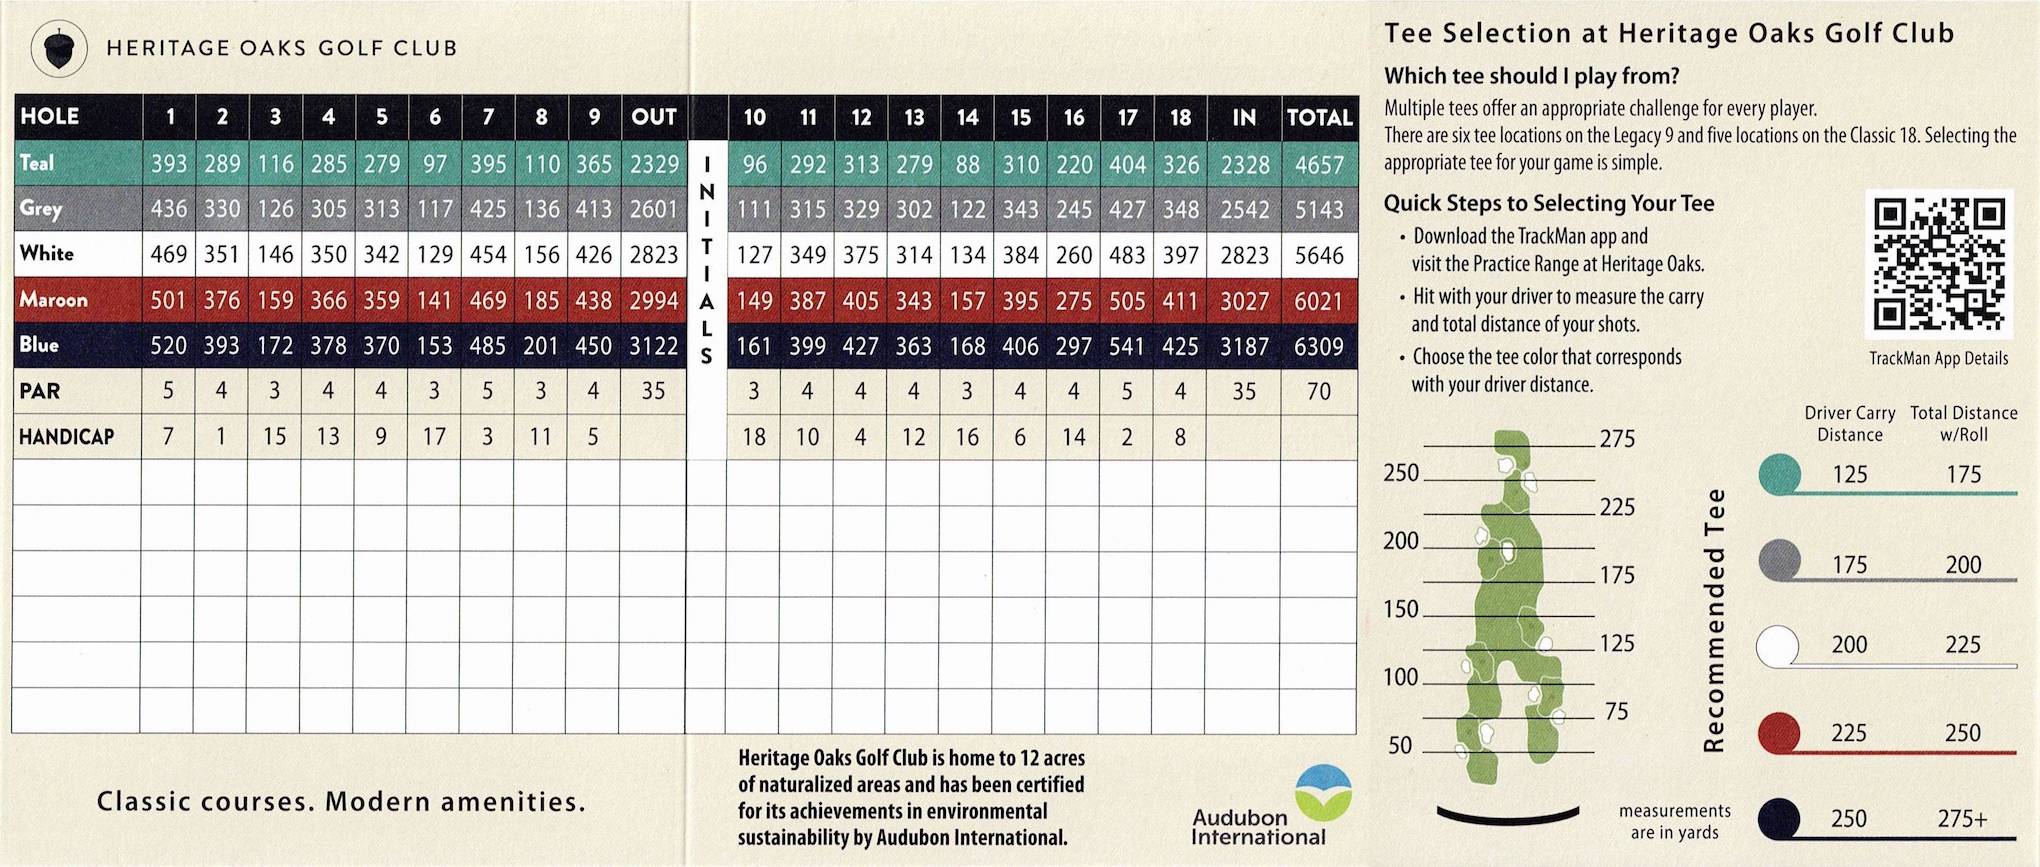 Scan of the scorecard from Heritage Oaks Golf Club - Classic 18 in Northbrook, Illinois. 